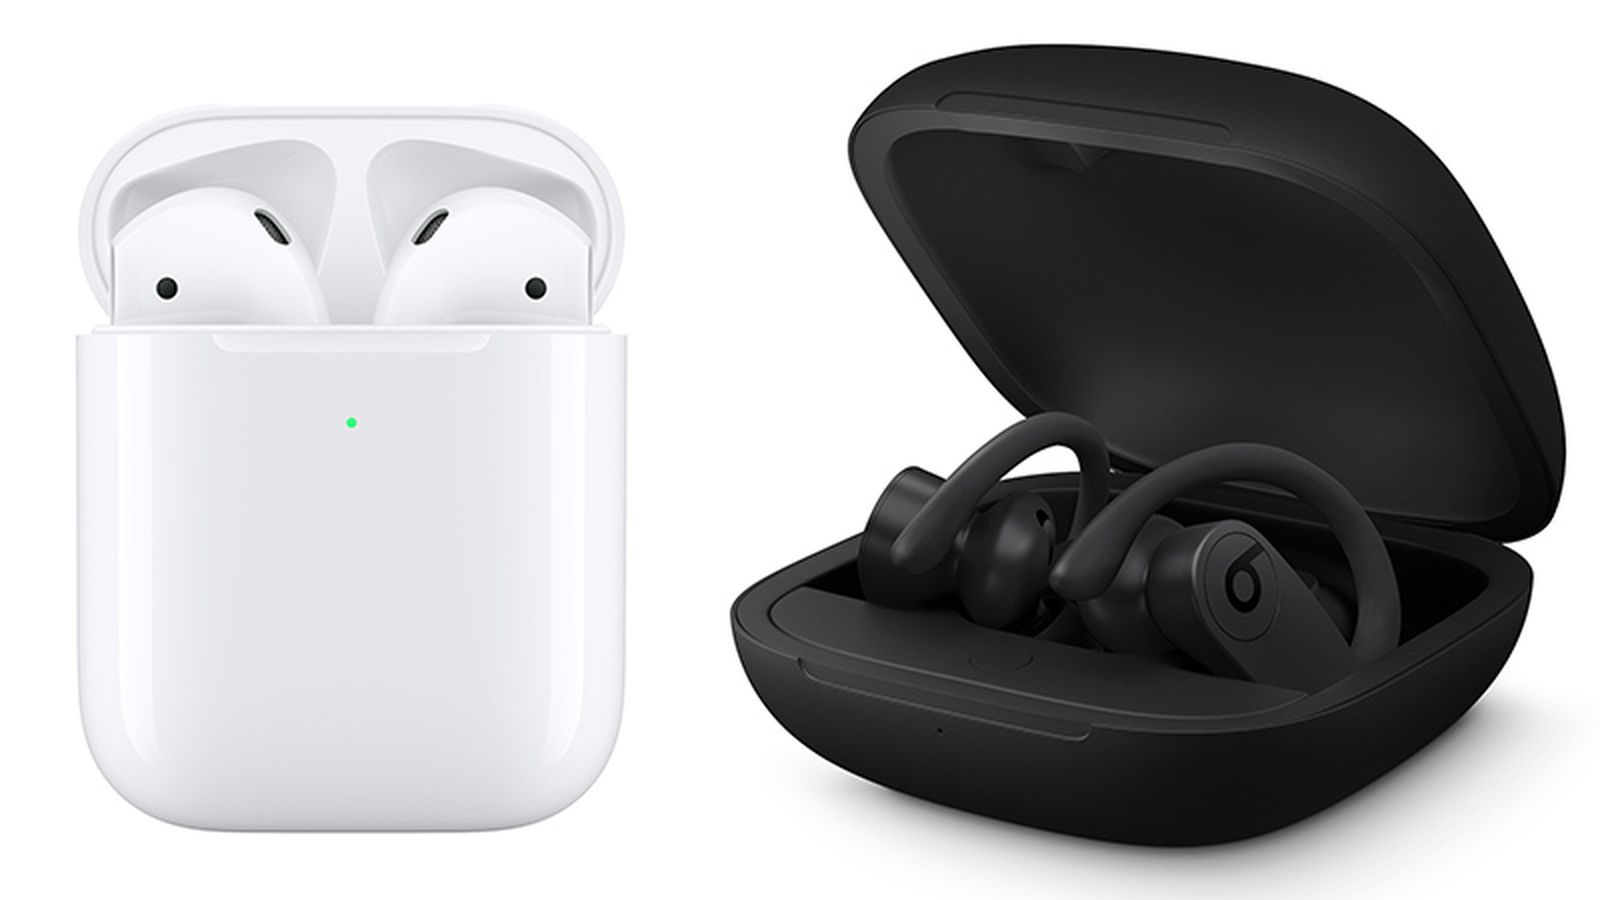 Apple AirPods with Wireless Charging Case - 2nd generation - true wireless earphones with mic - ear-bud - Bluetooth - for iPhone/iPad/iPod/TV/iWatch/MacBook/Mac/iMac